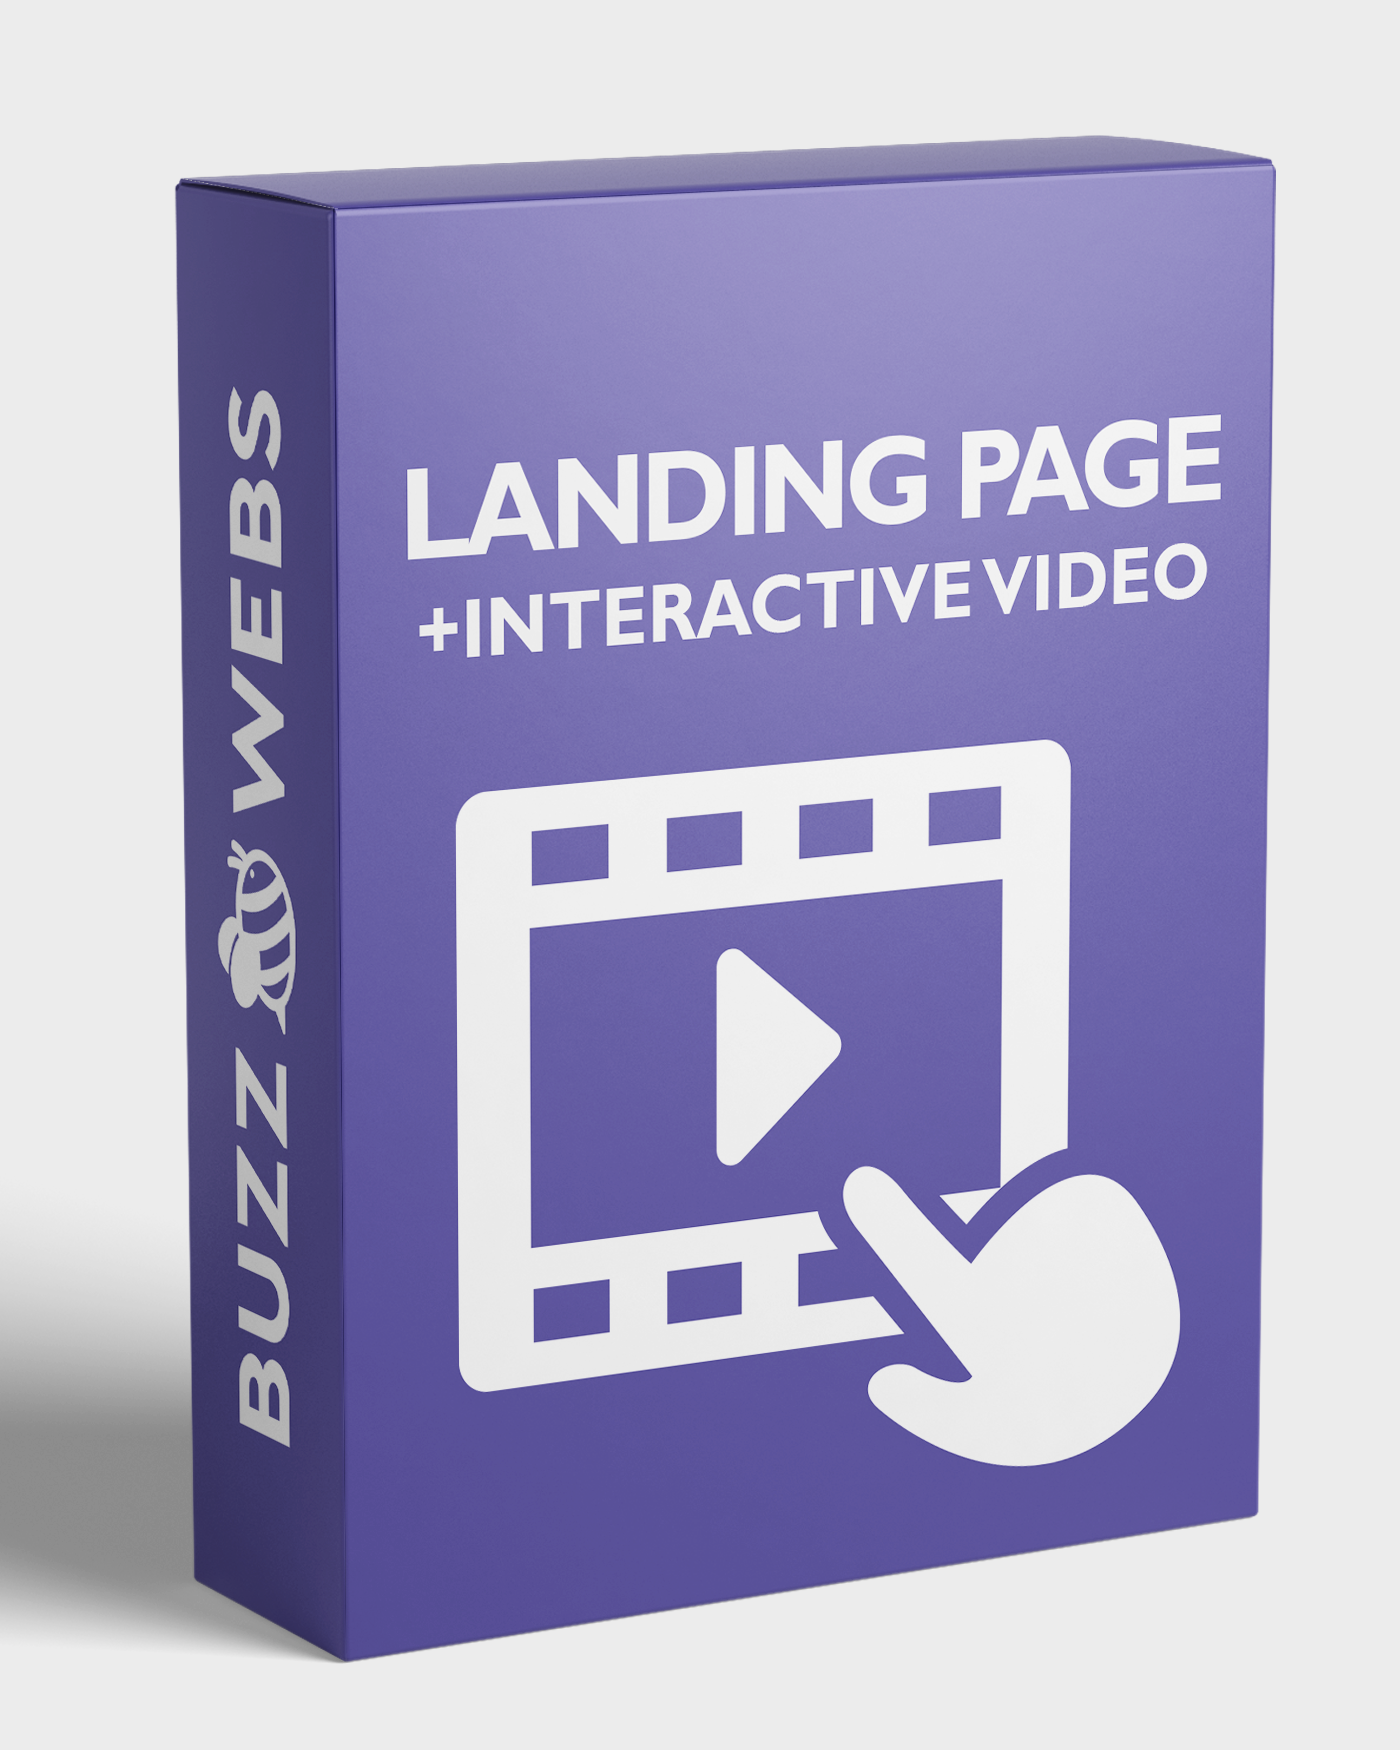 Landing page Buzz Webs